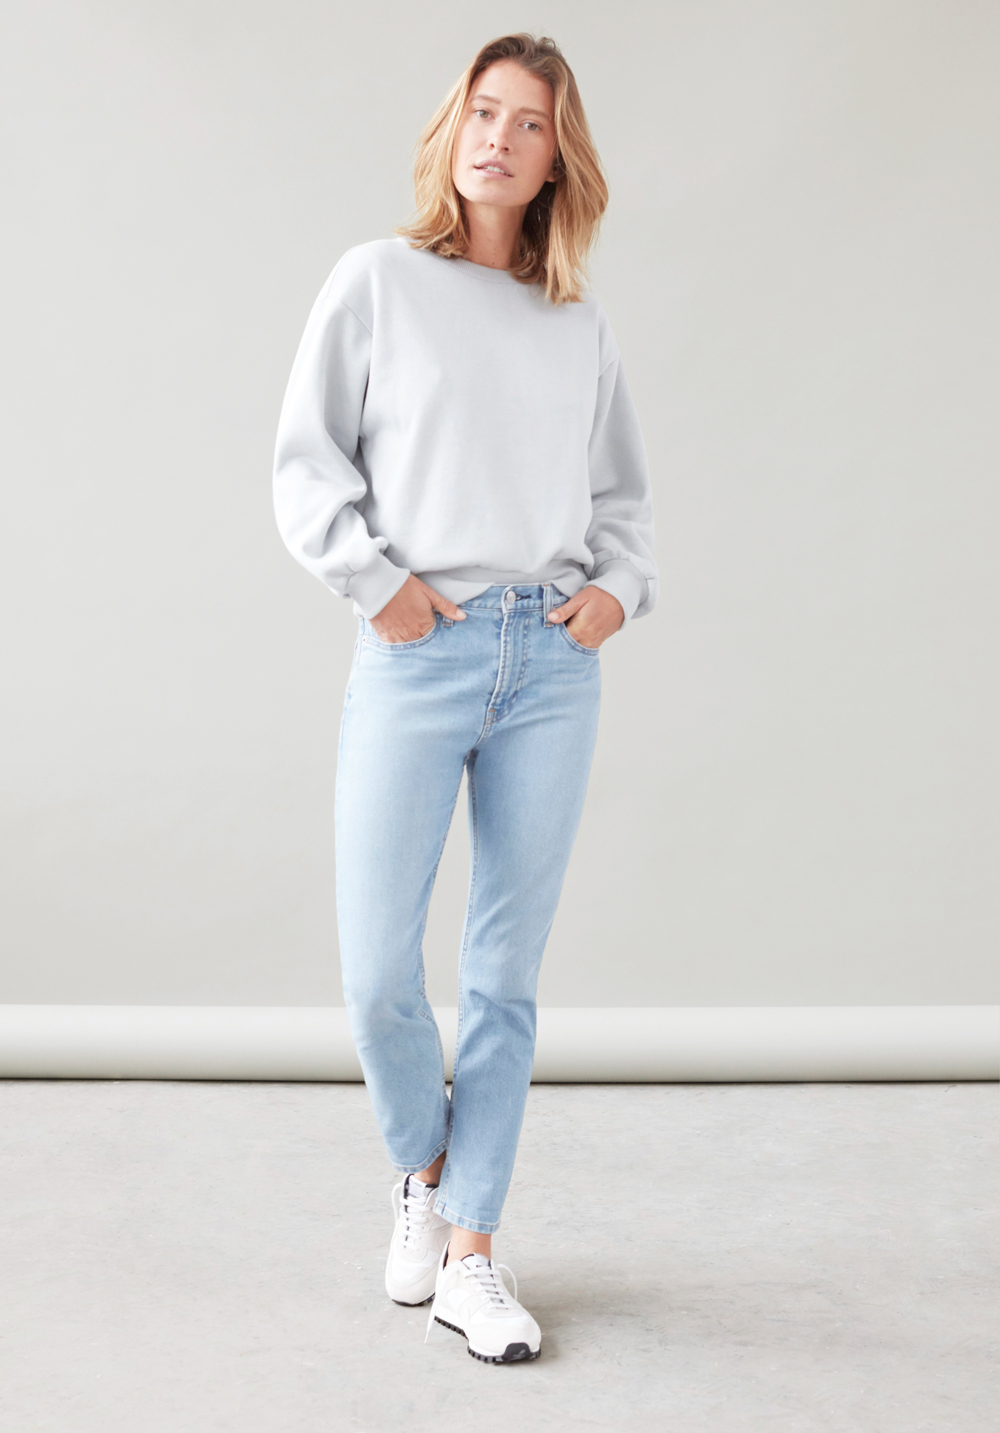 Everlane's New Light Wash Jeans | Who What Wear